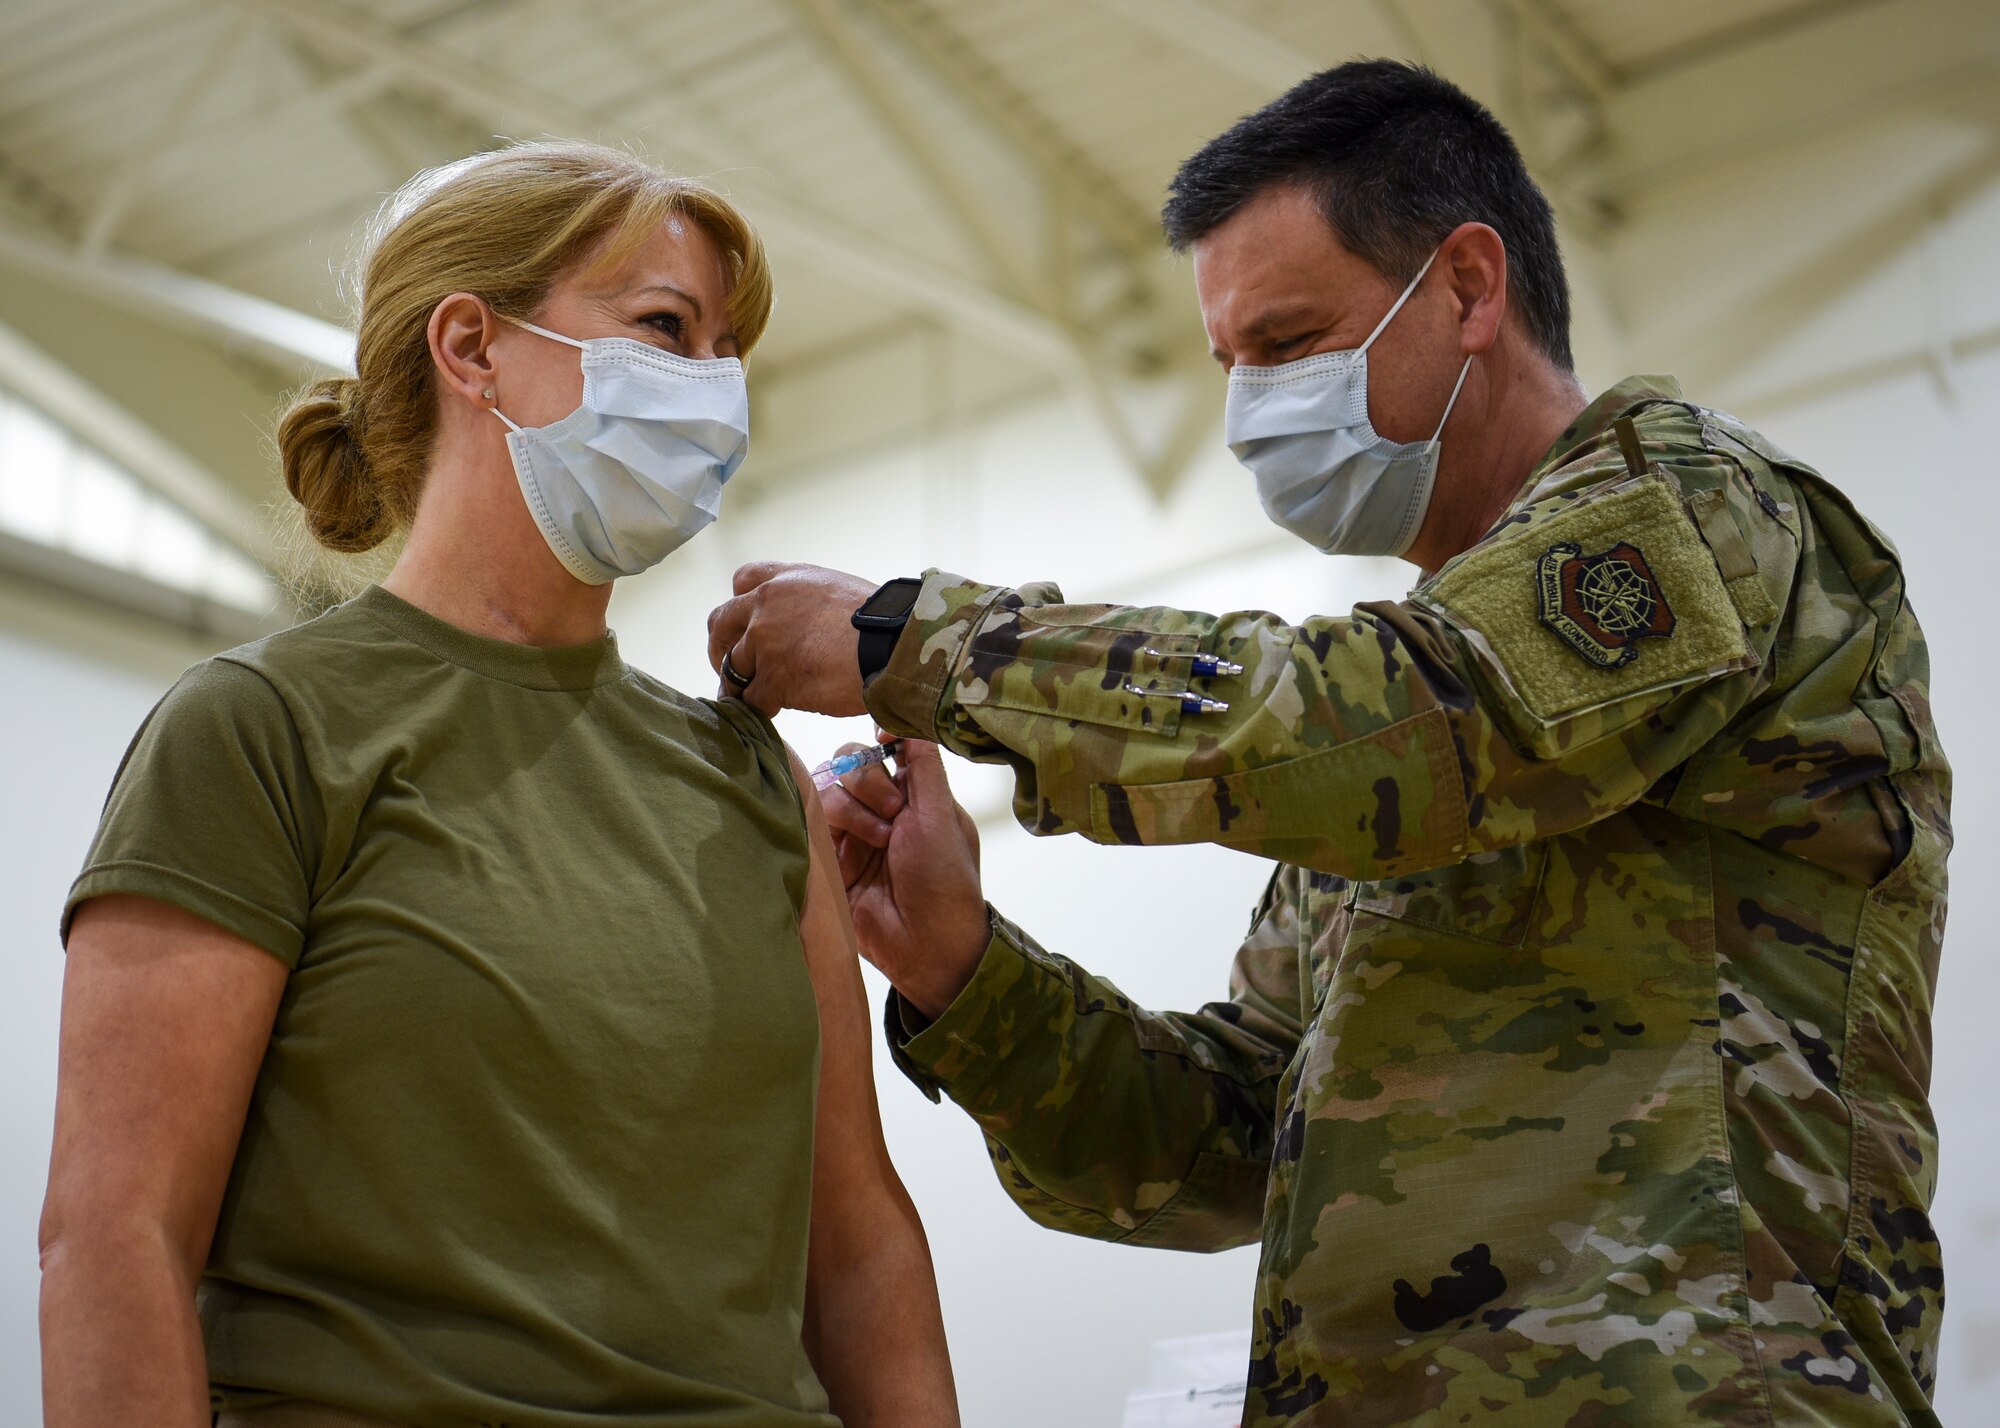 Maj. Dayla Gillispie, 87th Medical Group Family Health Clinic flight commander, receives the first COVID-19 vaccination on Joint Base McGuire-Dix-Lakehurst, New Jersey, from her husband, Lt. Col. Timothy Gillispie, 87th MDG Warrior Clinic flight commander, Dec. 31, 2020. Gillispie said receiving the vaccine was an honor and the next step to eliminating COVID-19. (U.S. Air Force photo by Senior Airman Shay Stuart)